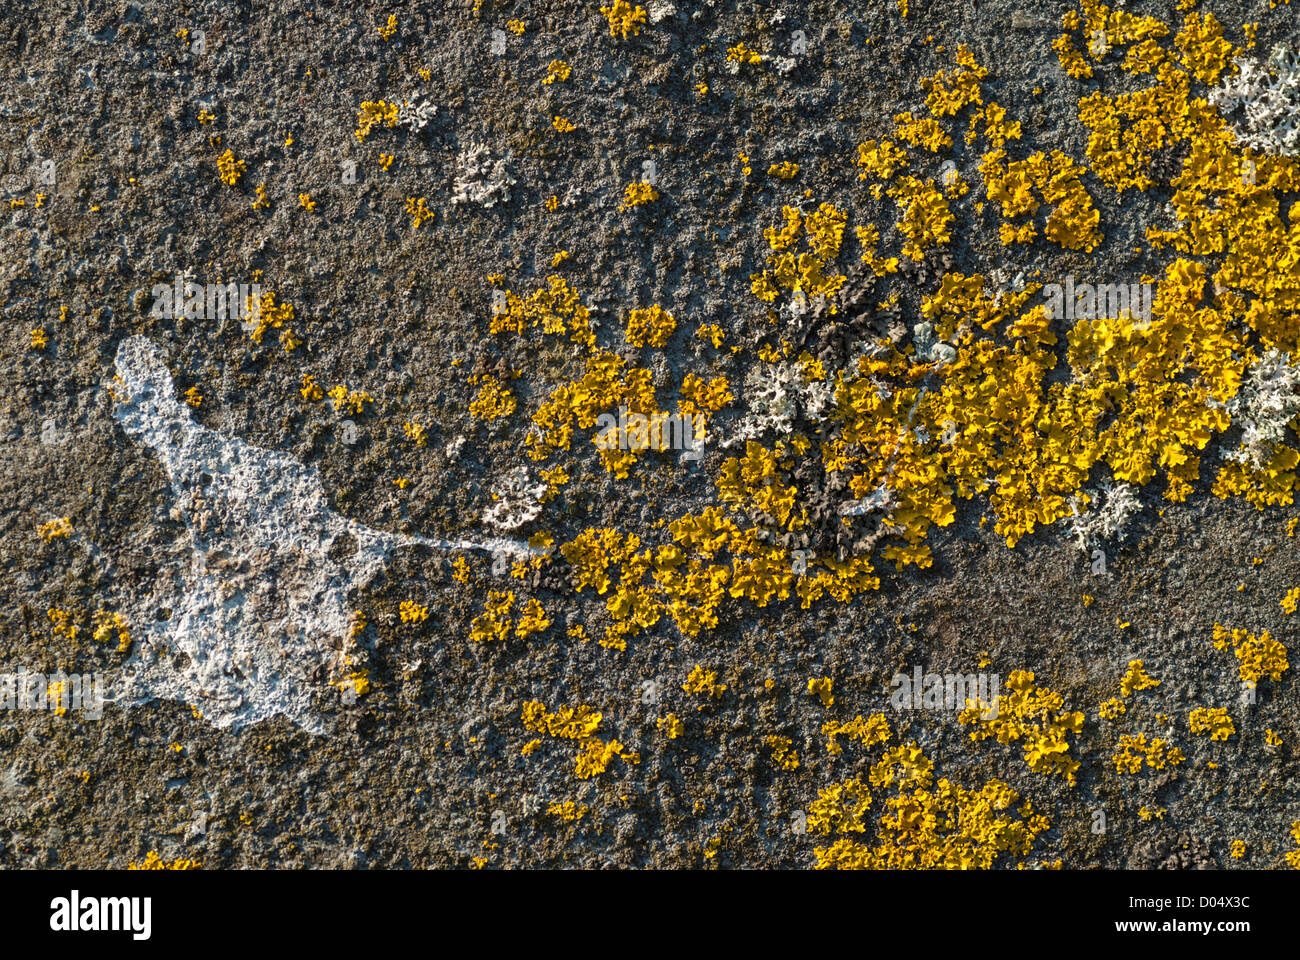 Lichens growing on an asphalt roof in Cardiff including bright yellow Xanthoria aureola, here with a splash of a bird dropping. Stock Photo